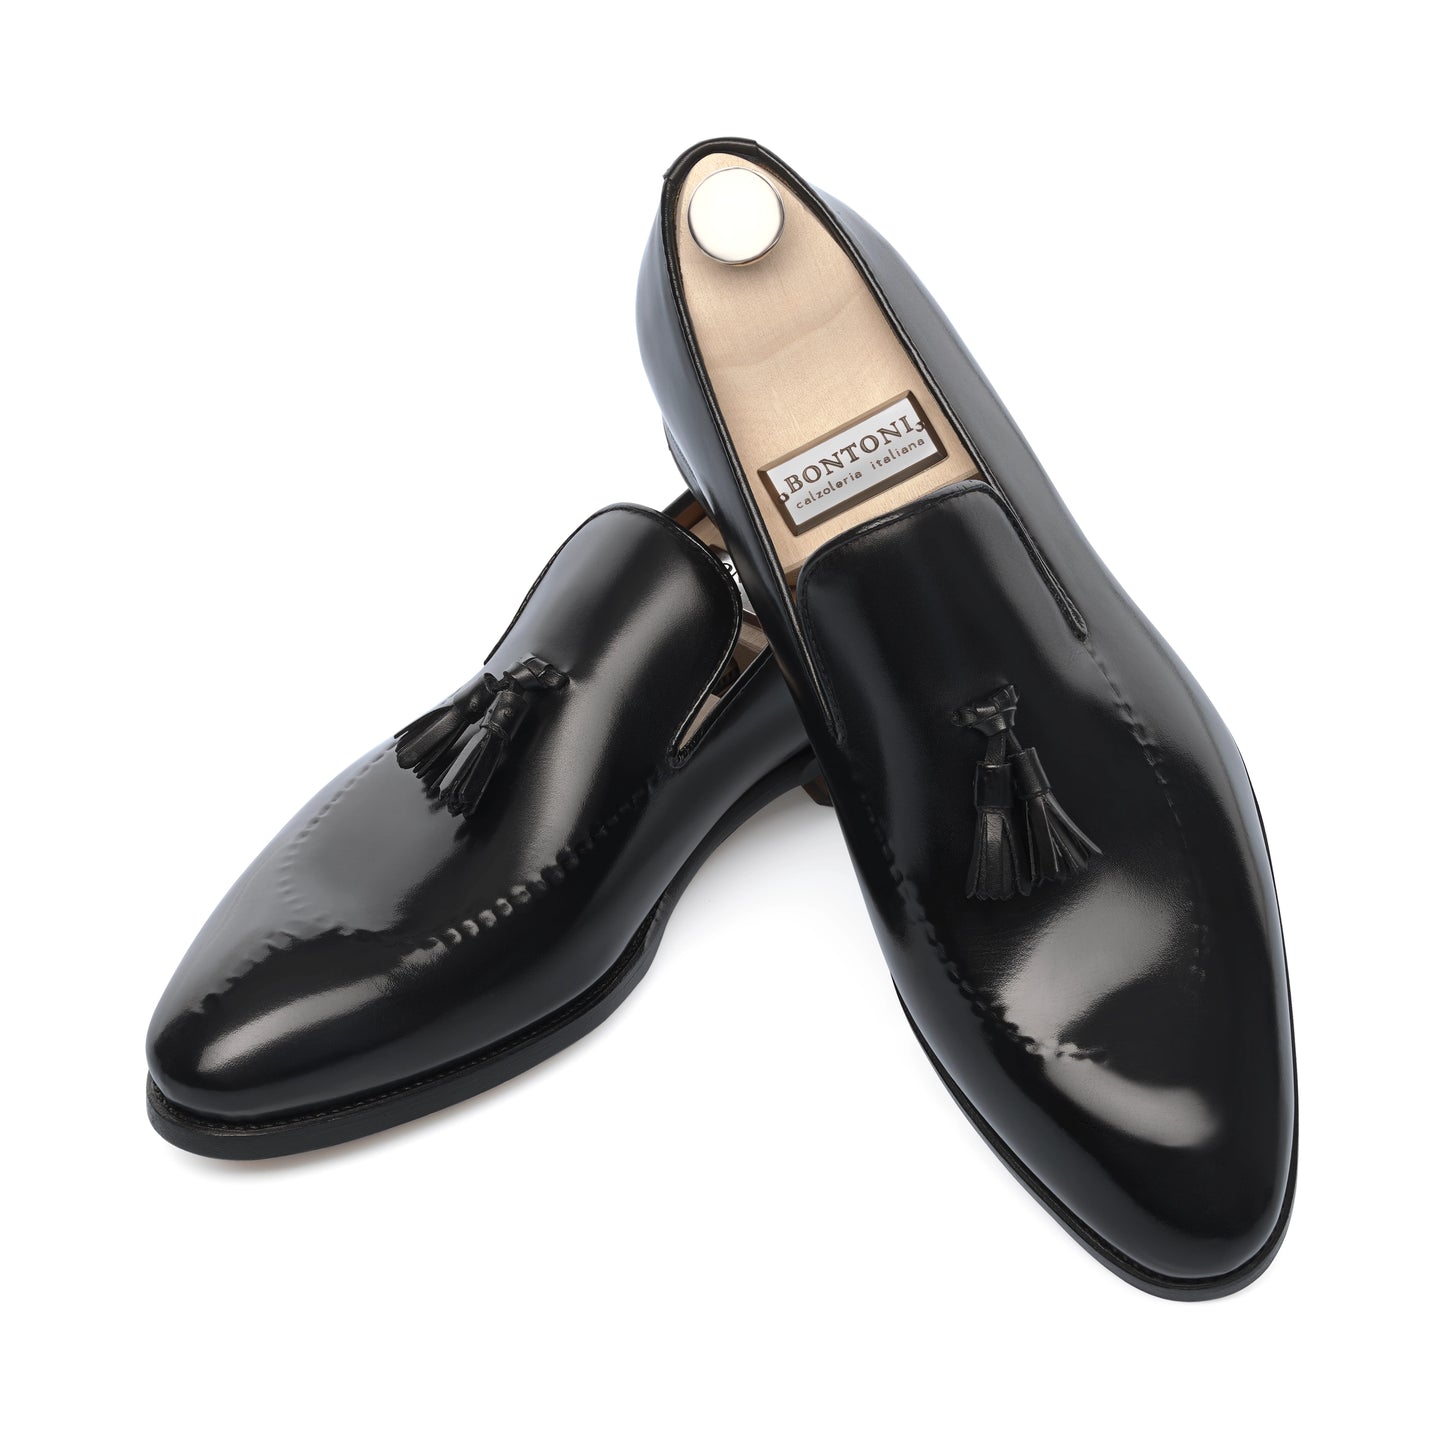 "Magnifico Reverse" Loafer with Tassels in Black